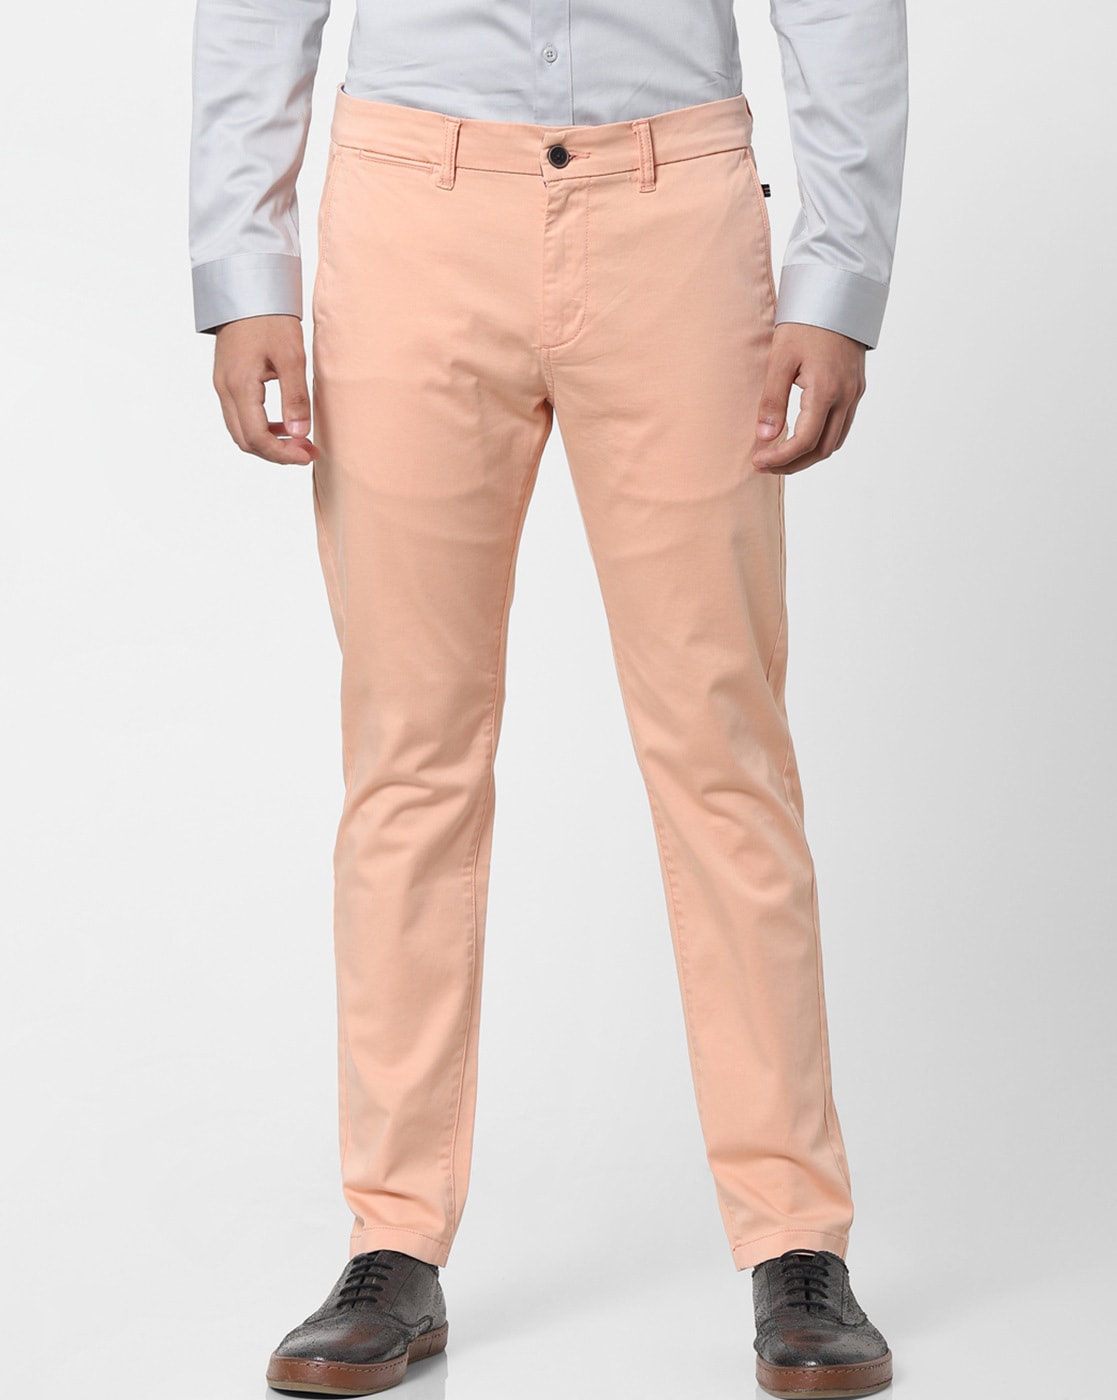 Peach Straight Cut Embroidered Pant Suit 2629SL05